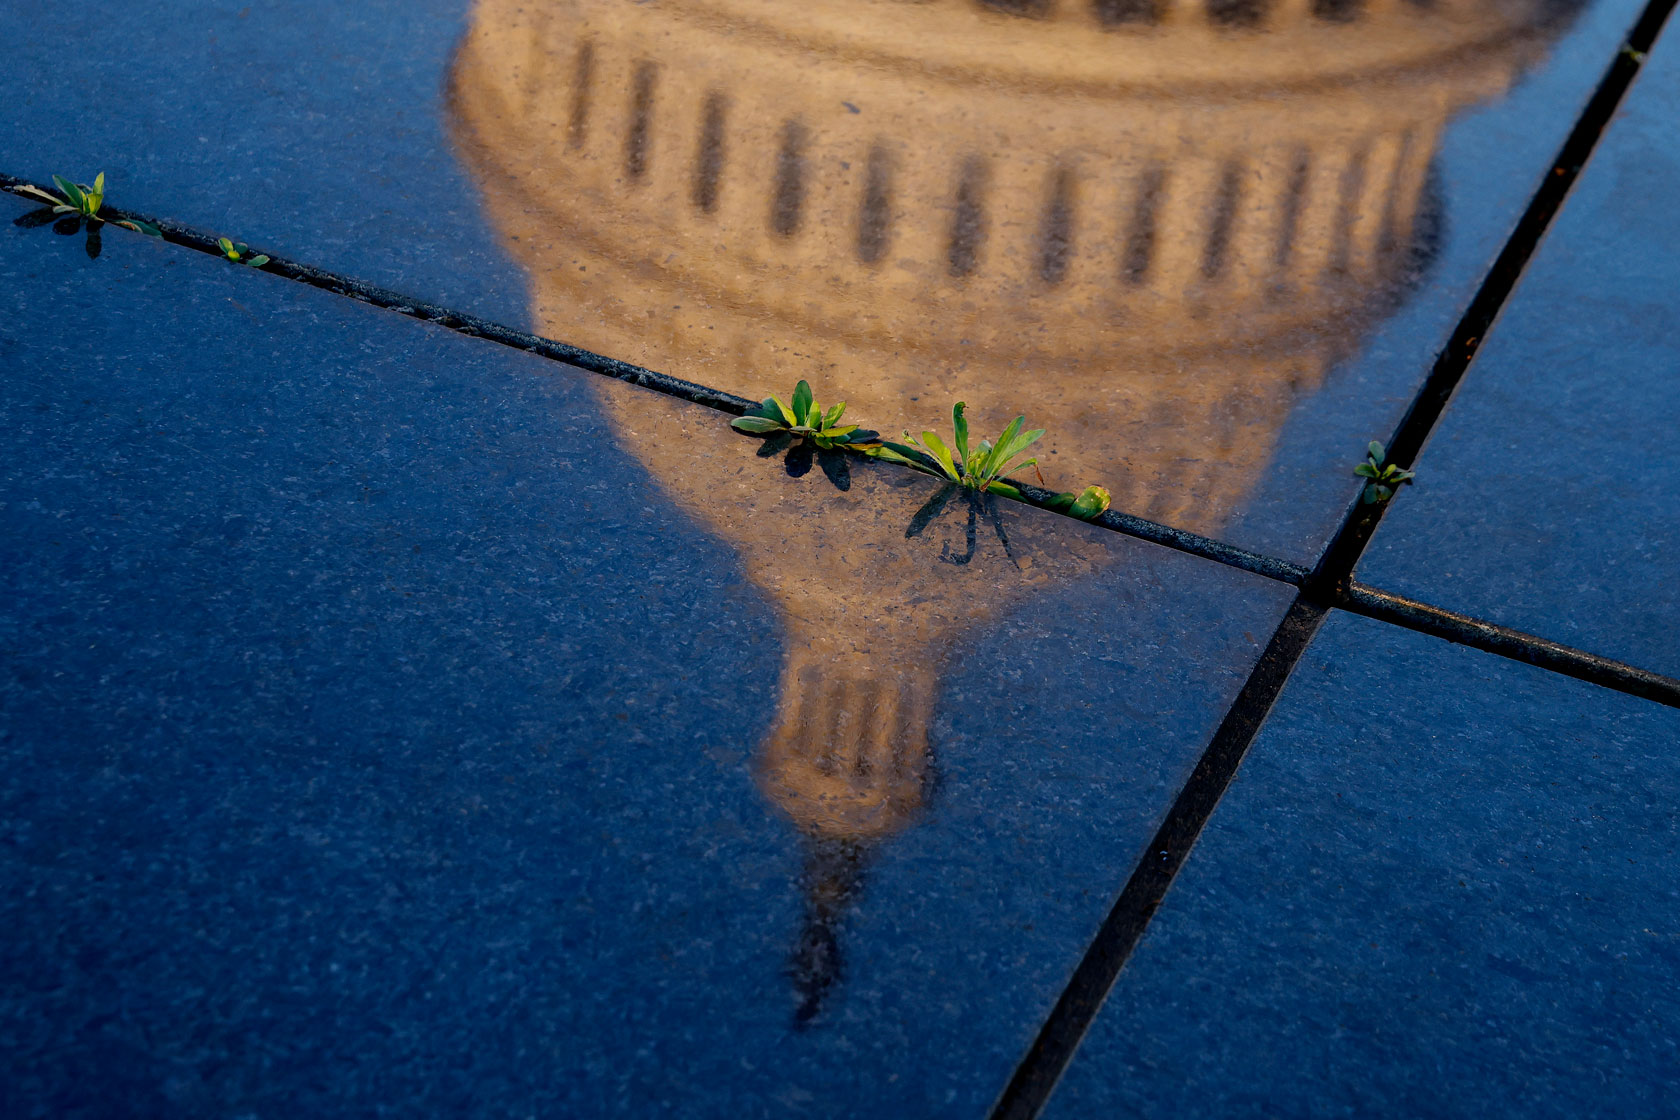 Photo shows the U.S. Capitol building dome reflected on shiny black marble, with small green weeds growing through the marble cracks.